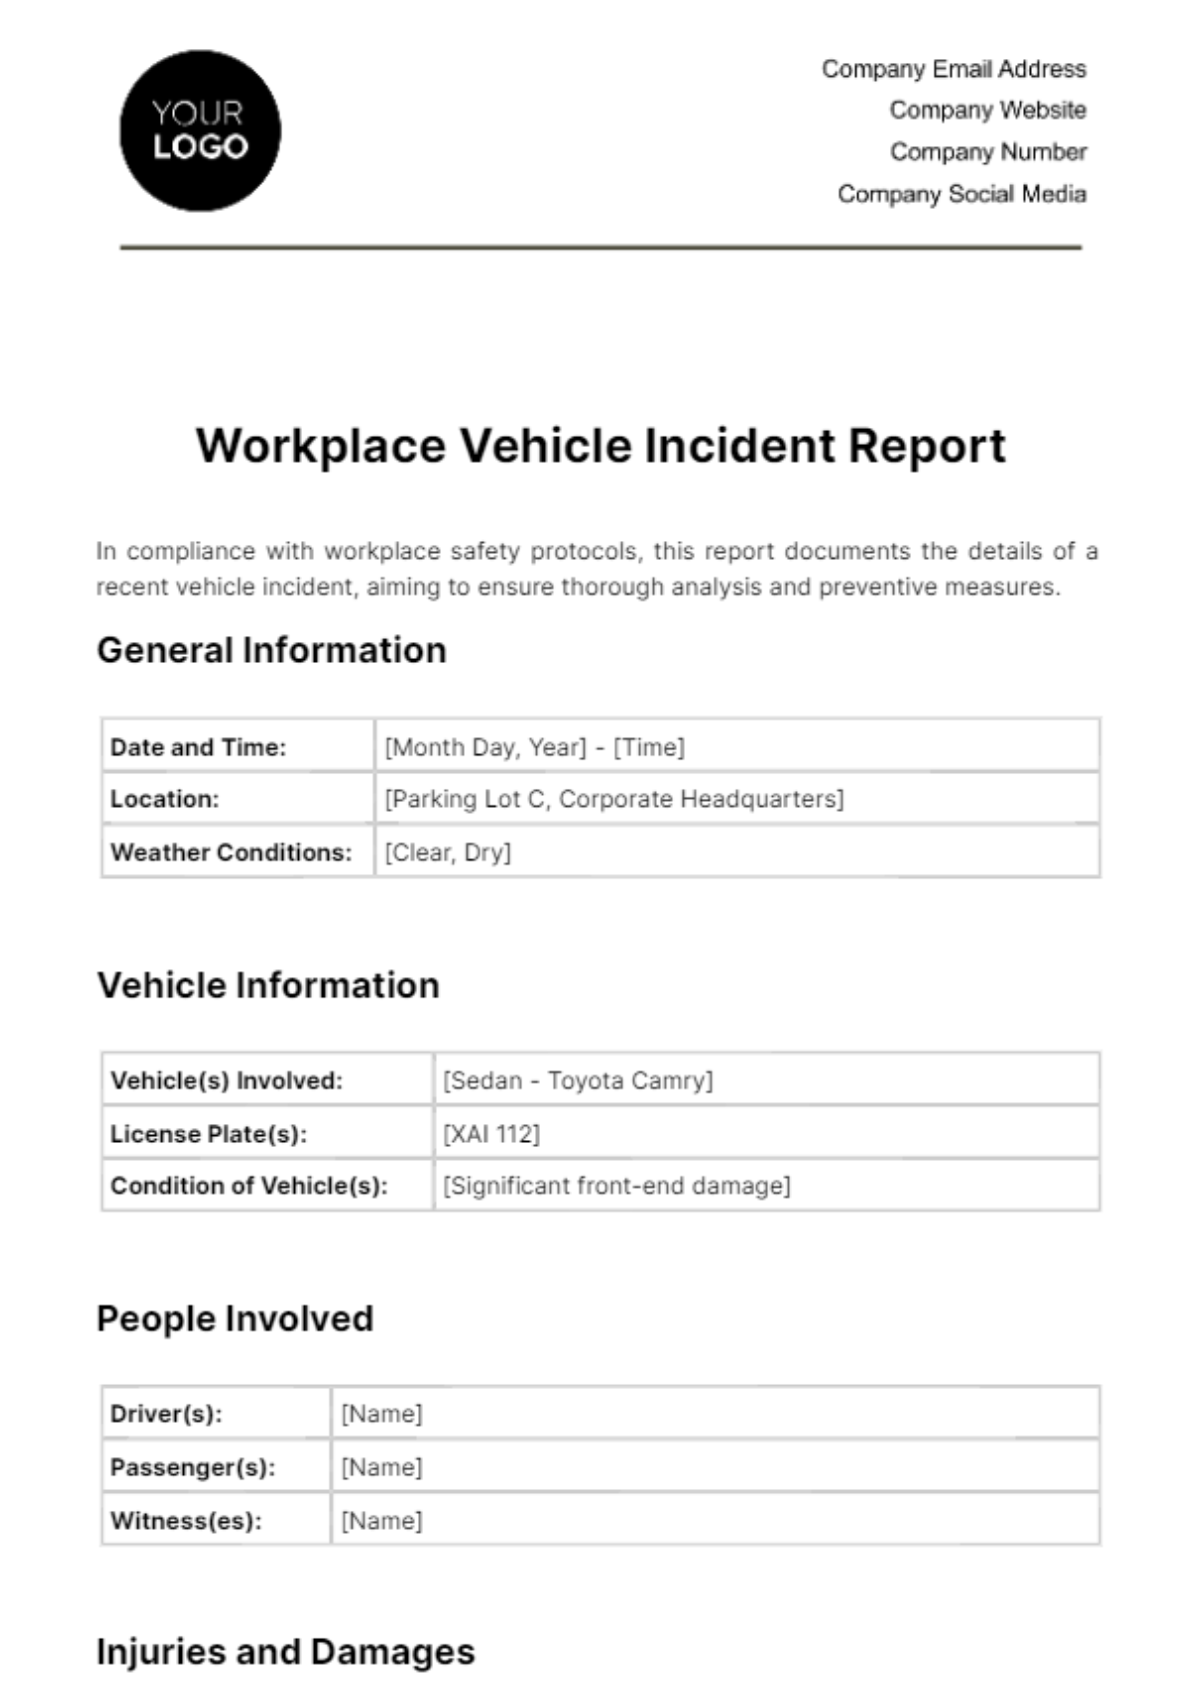 Free Workplace Vehicle Incident Report Template